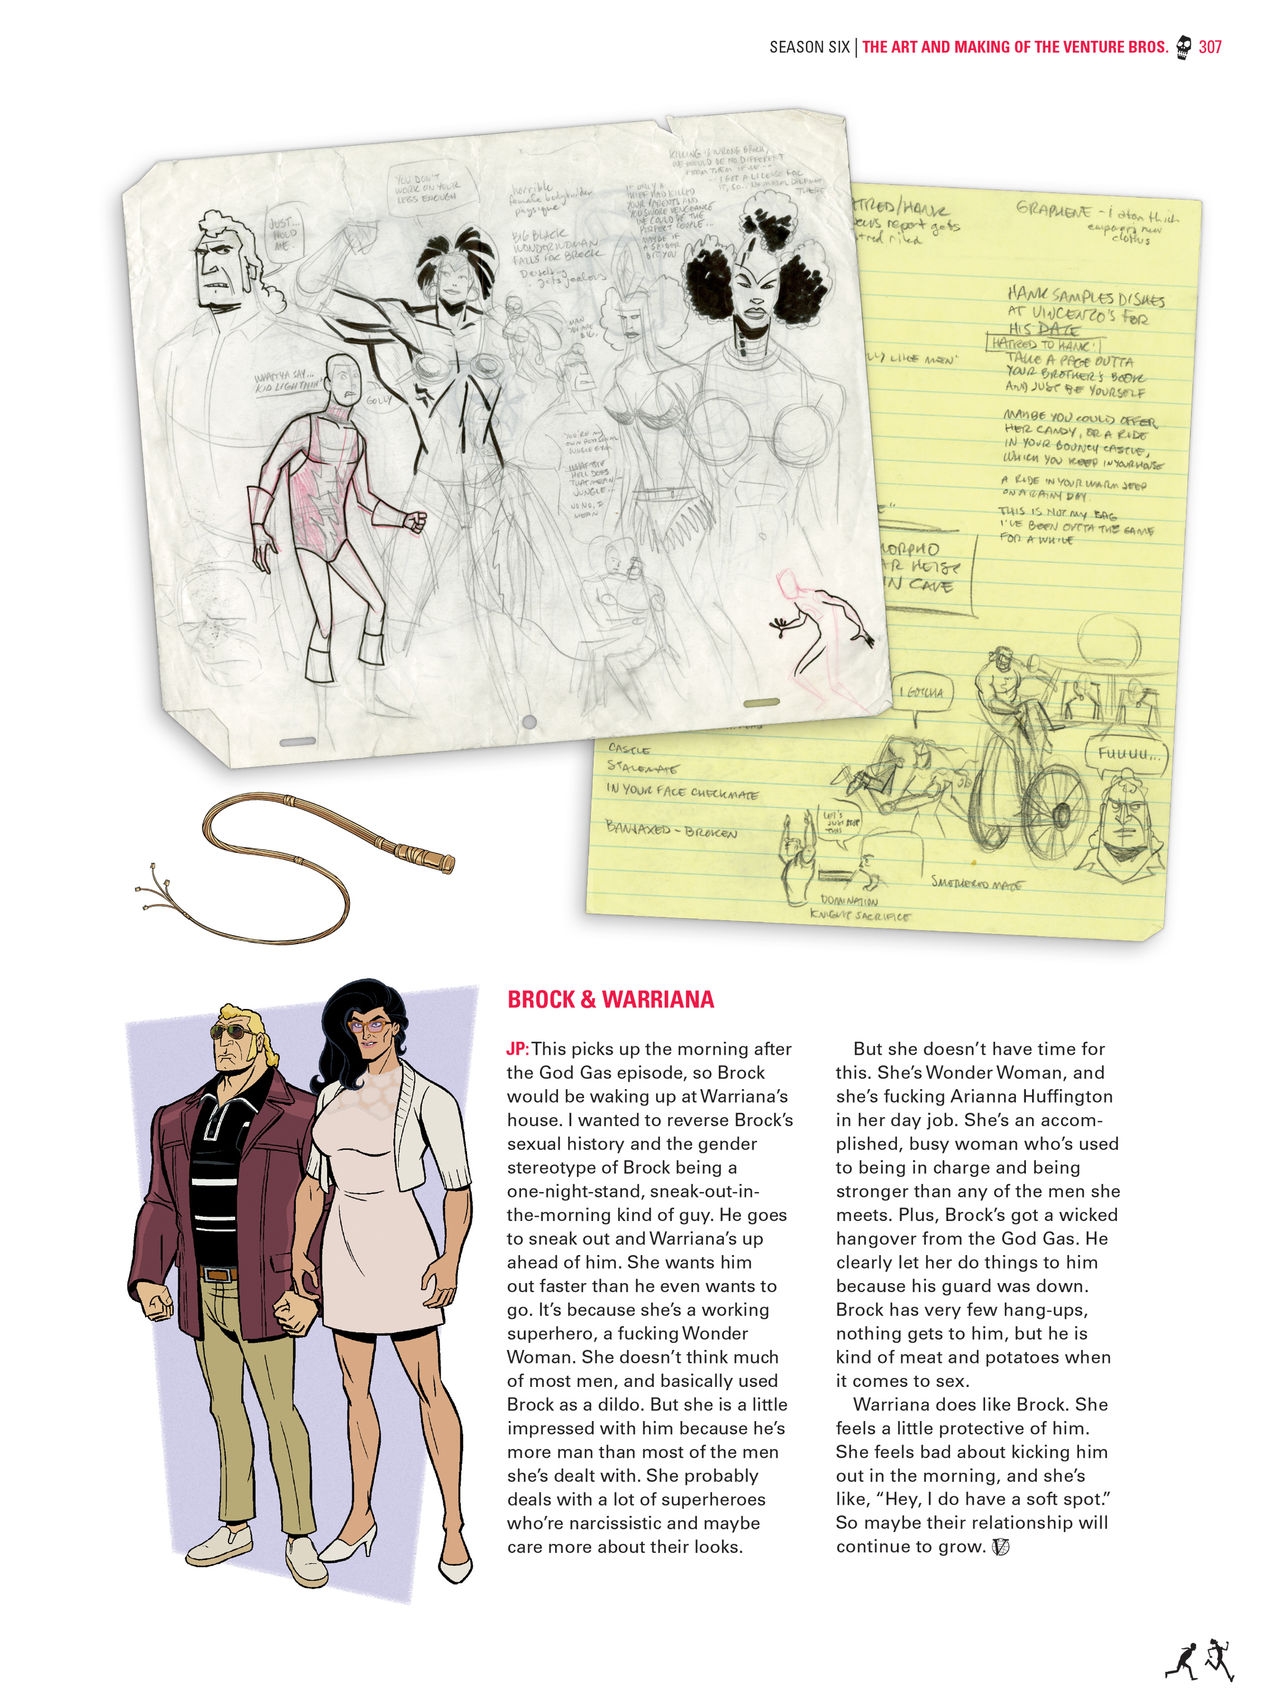 Go Team Venture! - The Art and Making of the Venture Bros 305